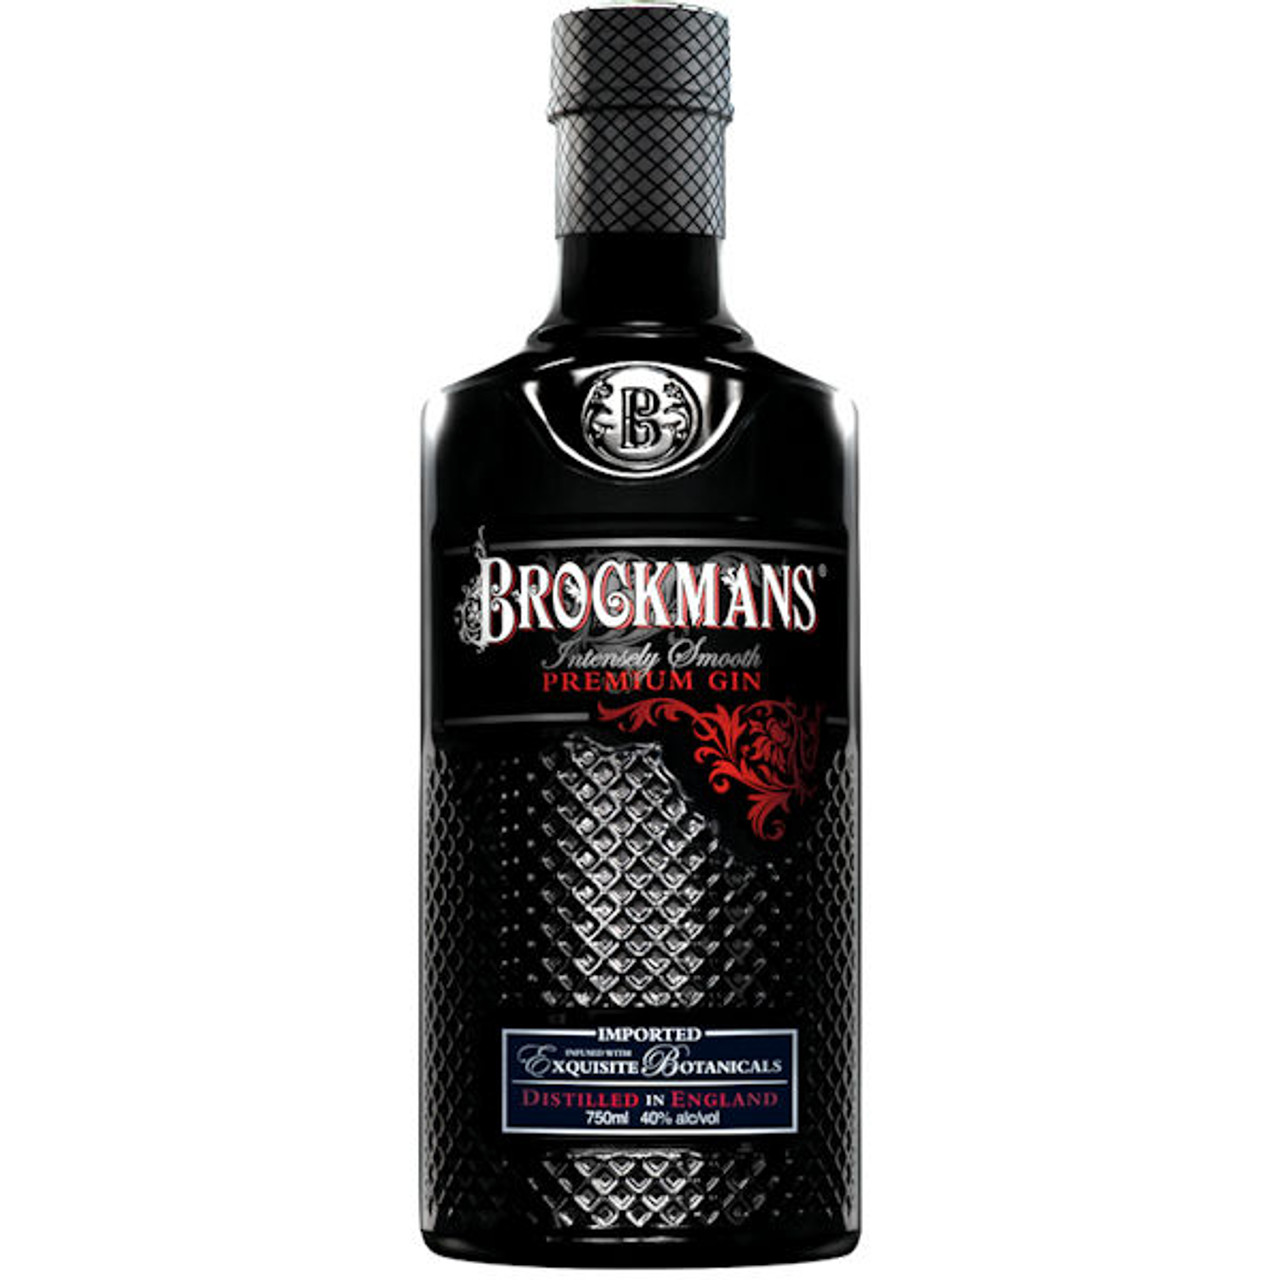 Brockman's Intensely Smooth English Gin 750ml